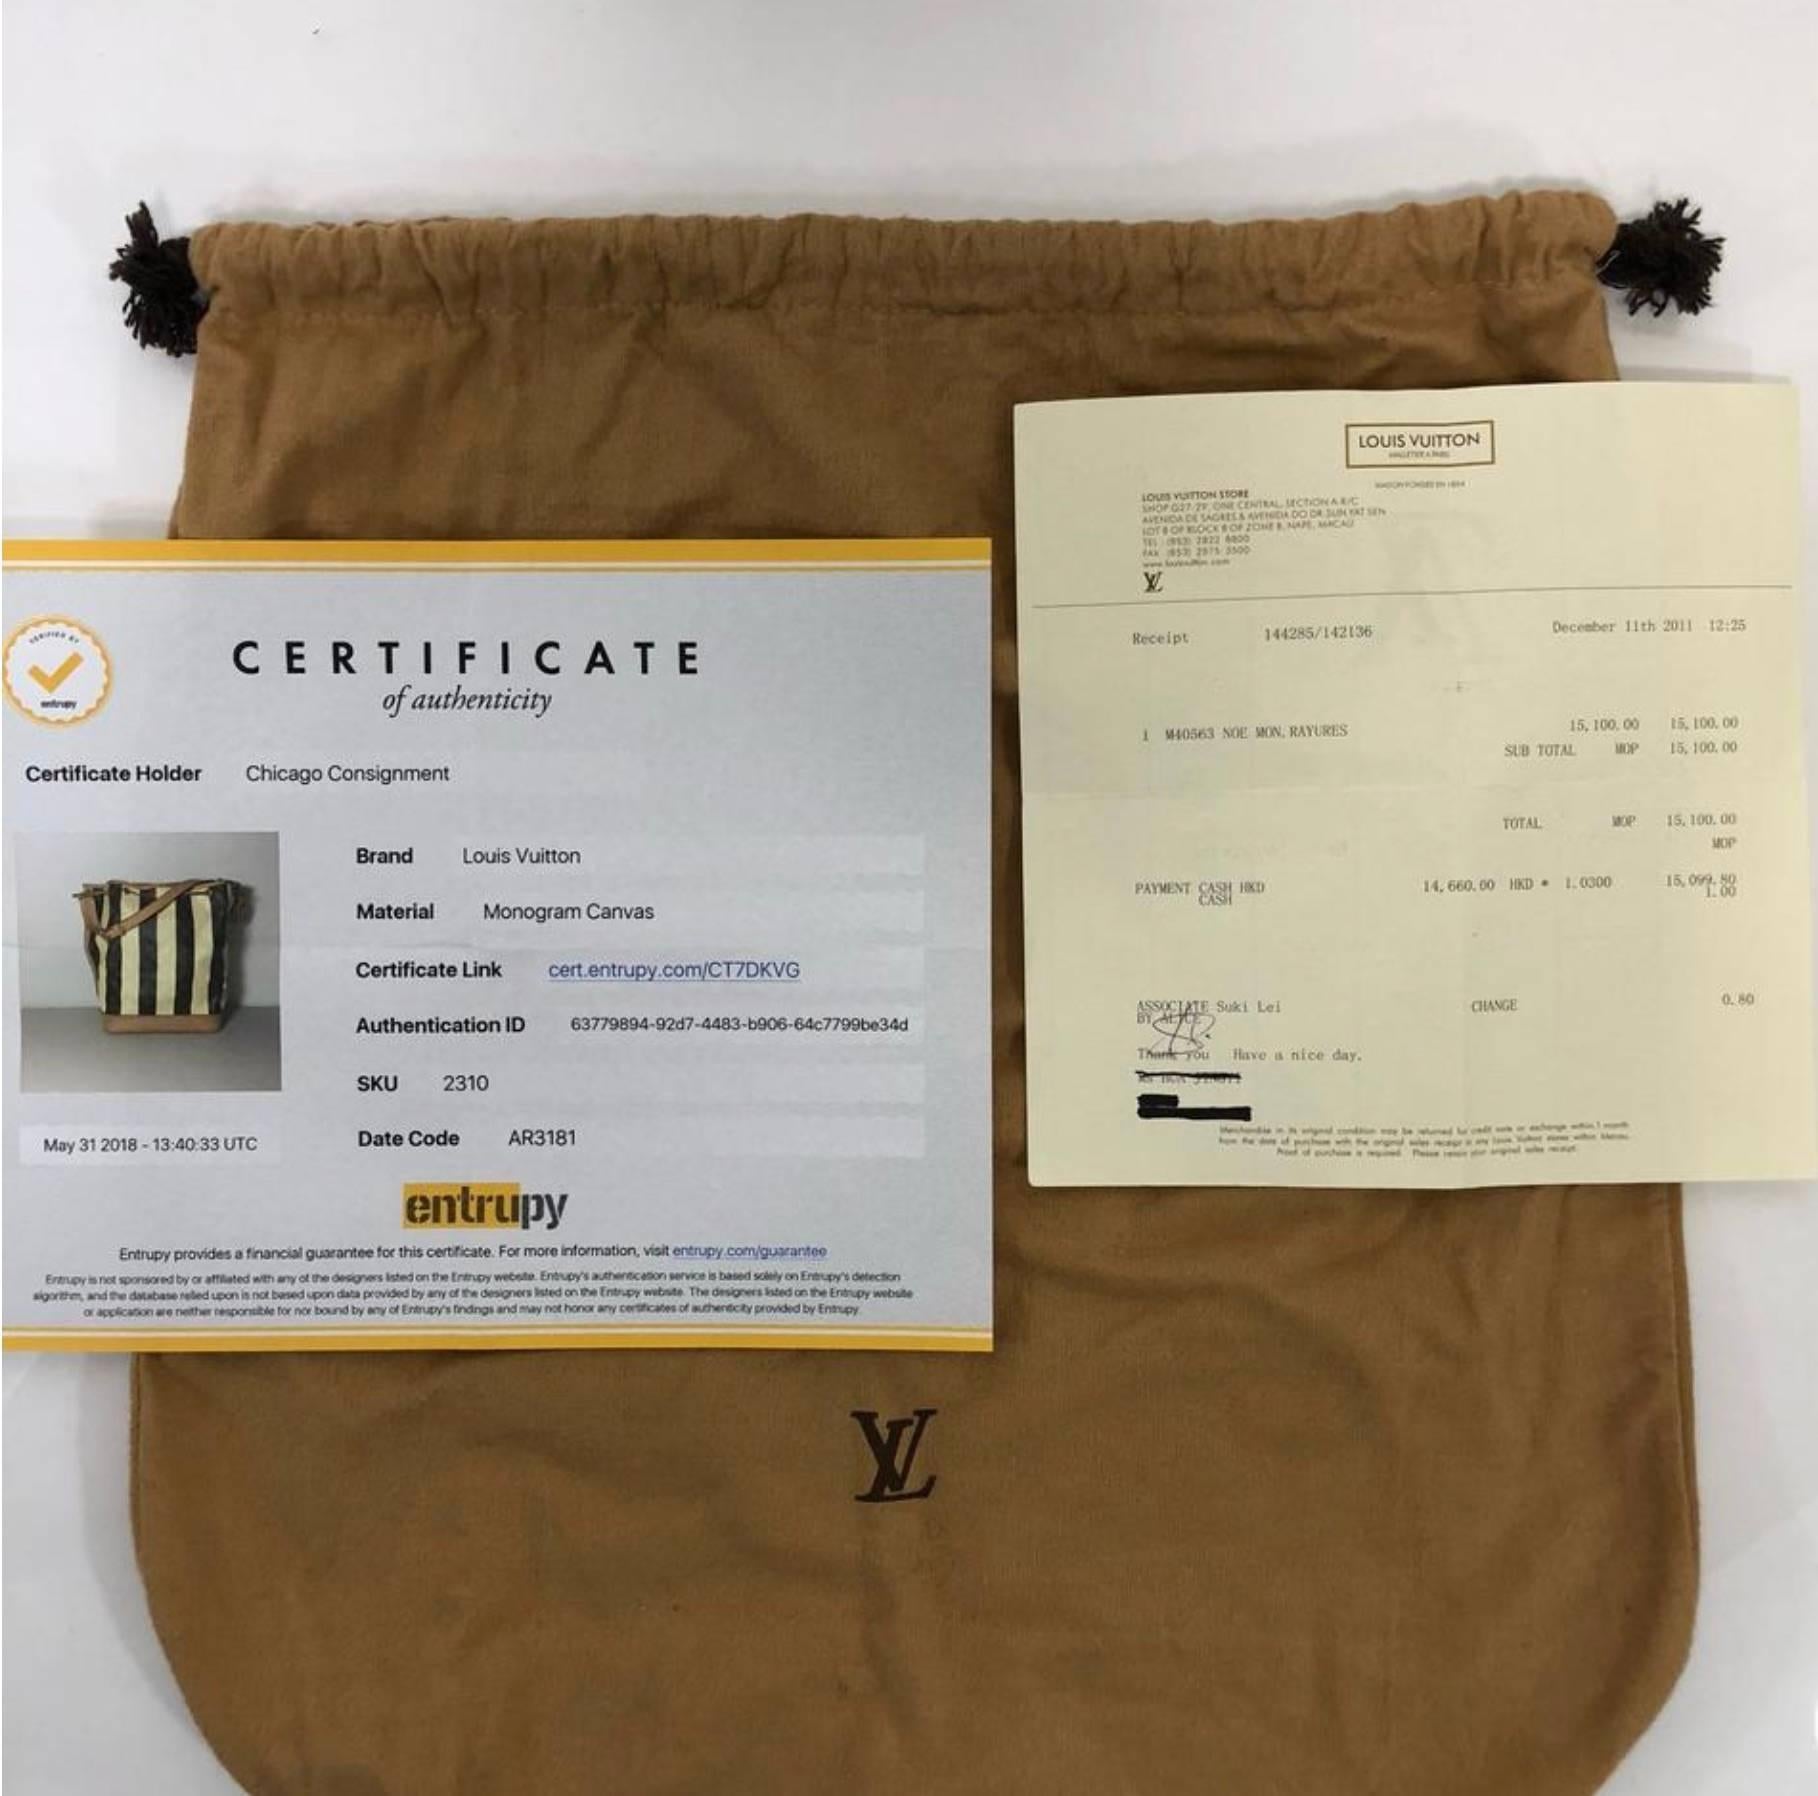 MODEL - Louis Vuitton Limited Edition Monogram Rayures Noe GM

CONDITION - Very Good. Clean and light vachette. No rips, holes, tears, stains or odors. Very light water marks. Piece maintains original shape without creases or cracks.

SKU -